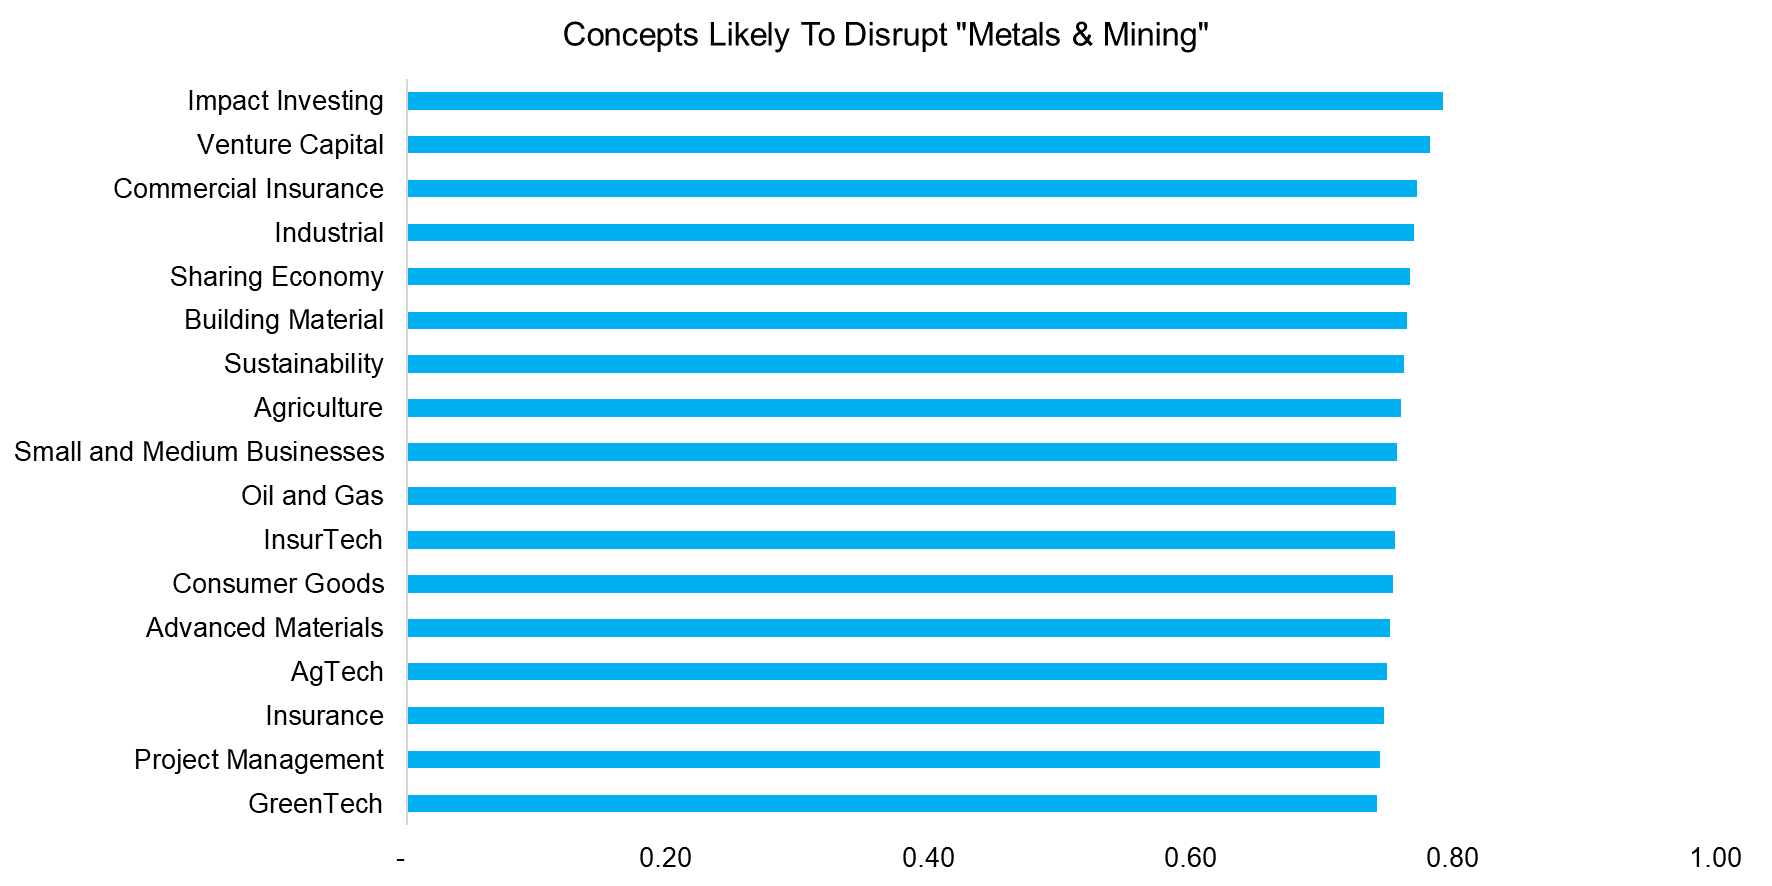 Concepts Likely To Disrupt Metals & Mining